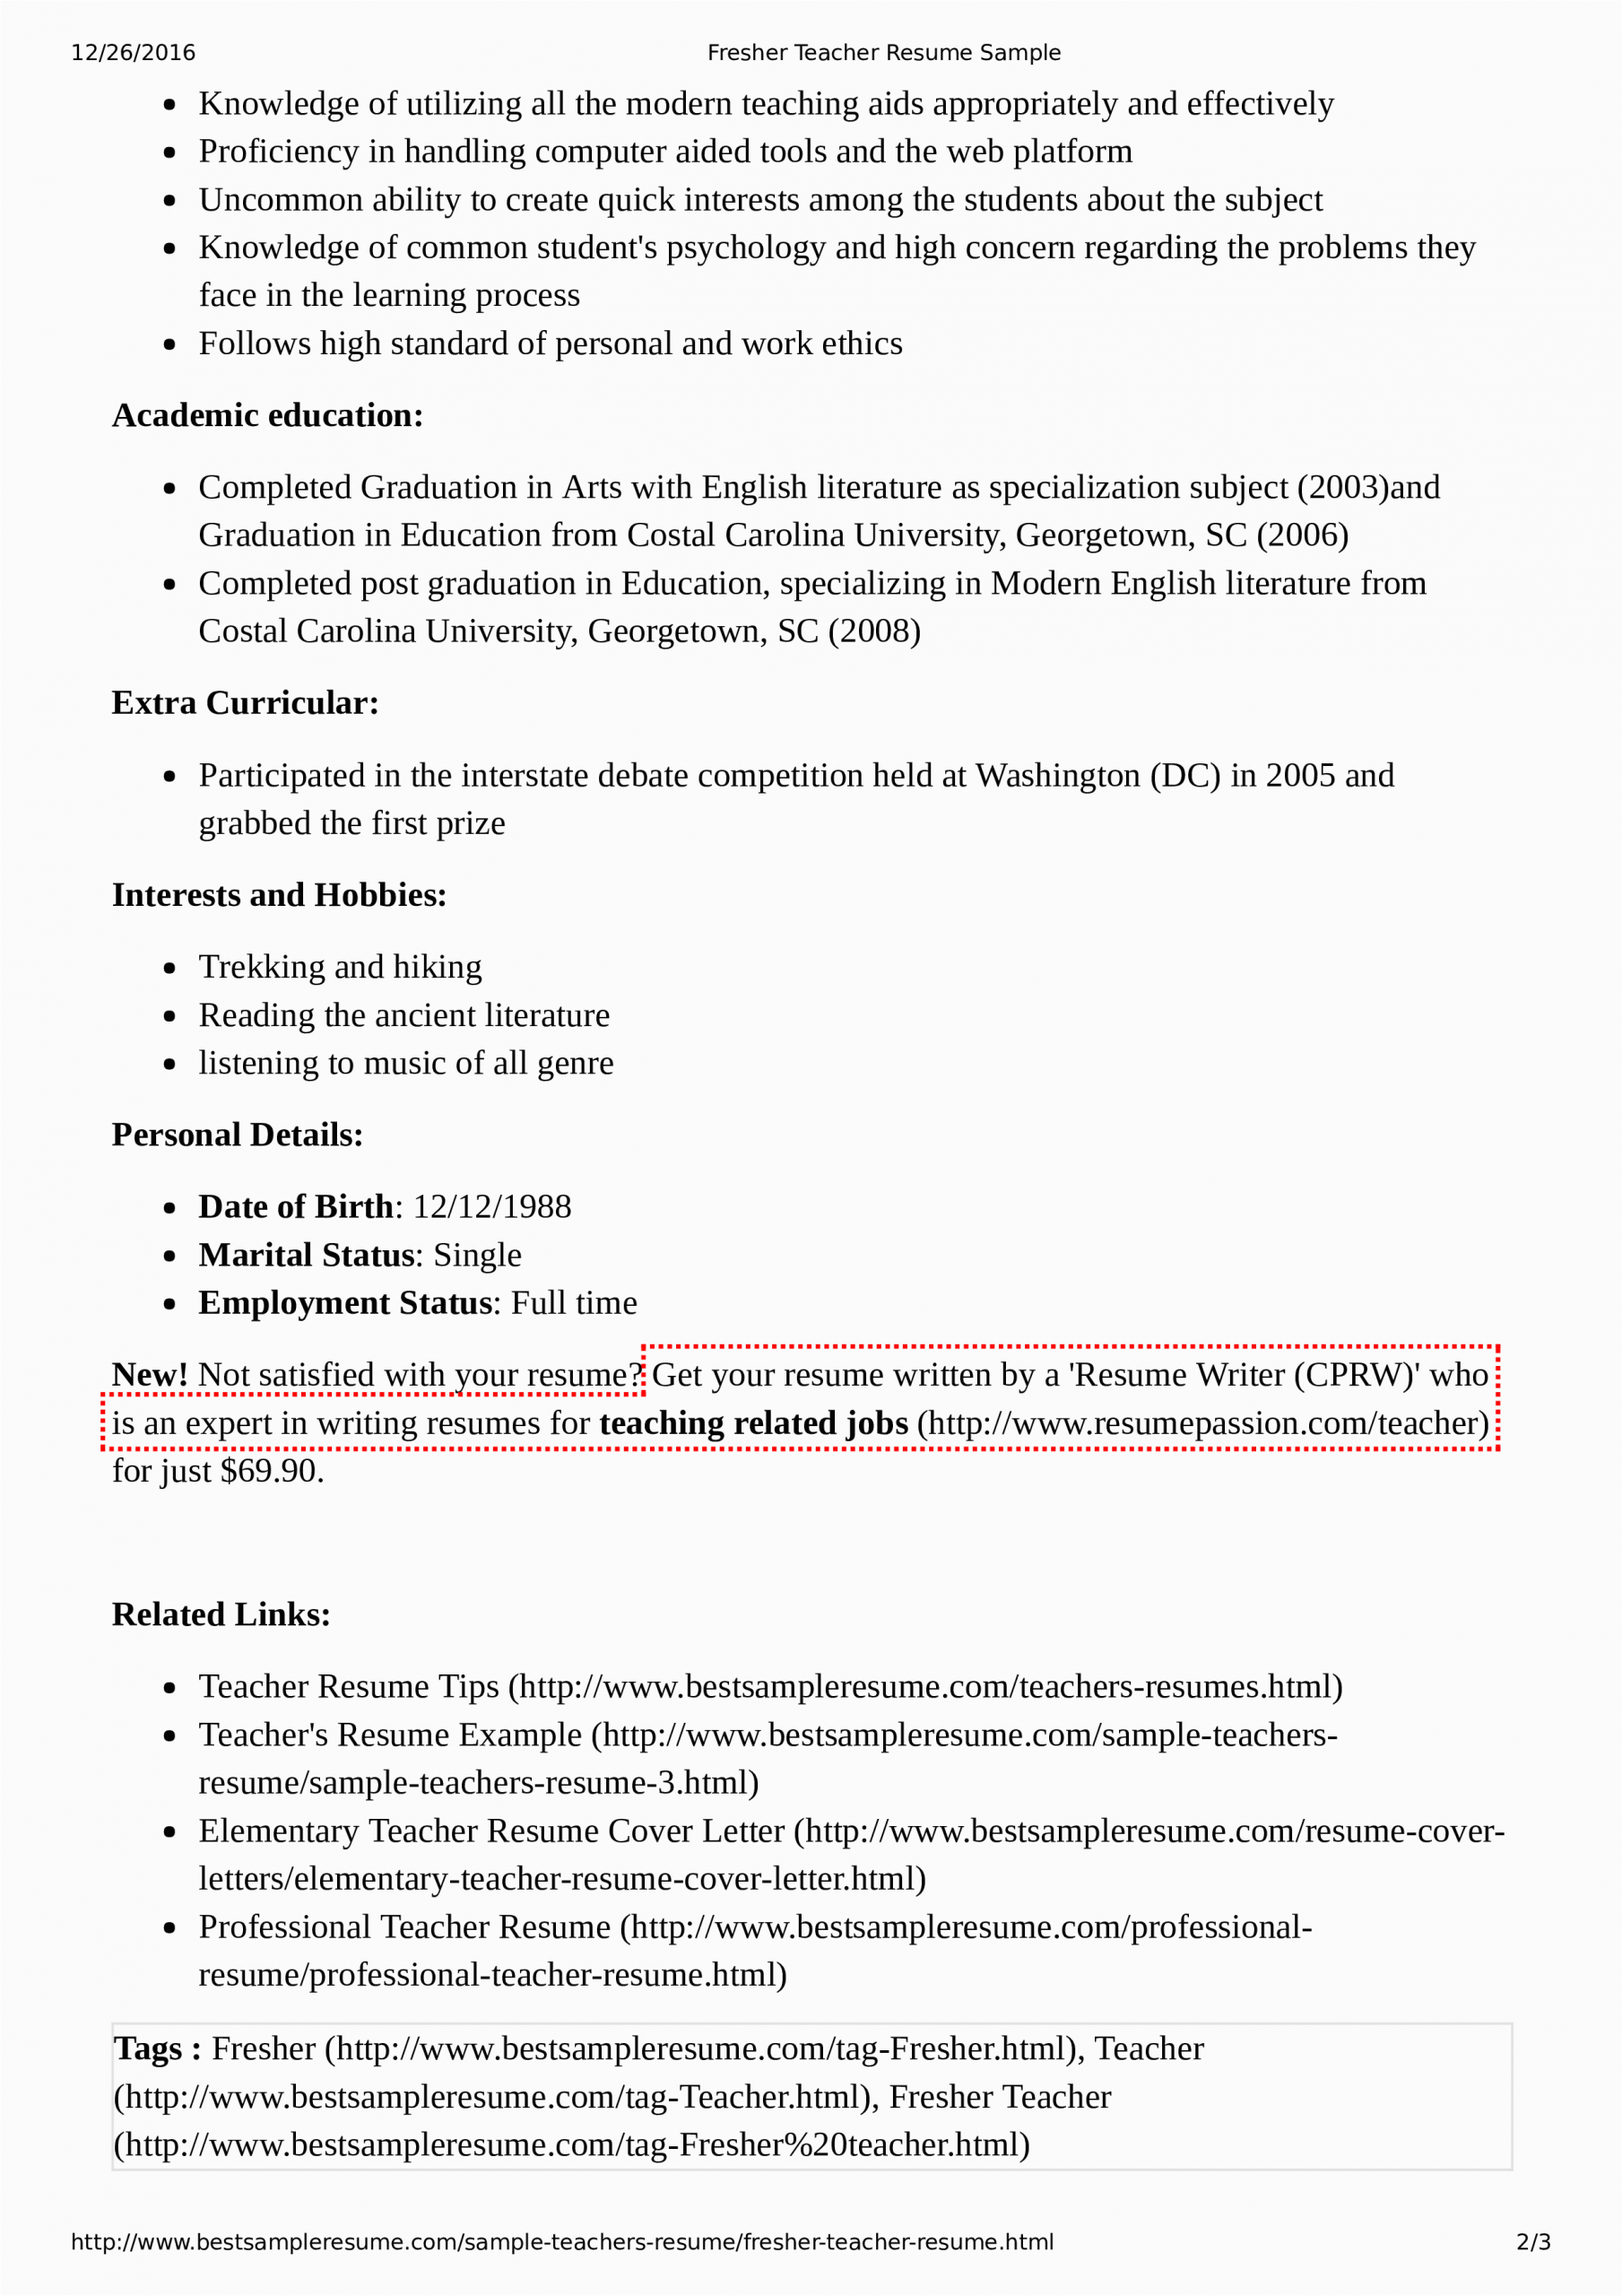 Sample Resume for Preschool Teacher with No Experience Pin On Resume